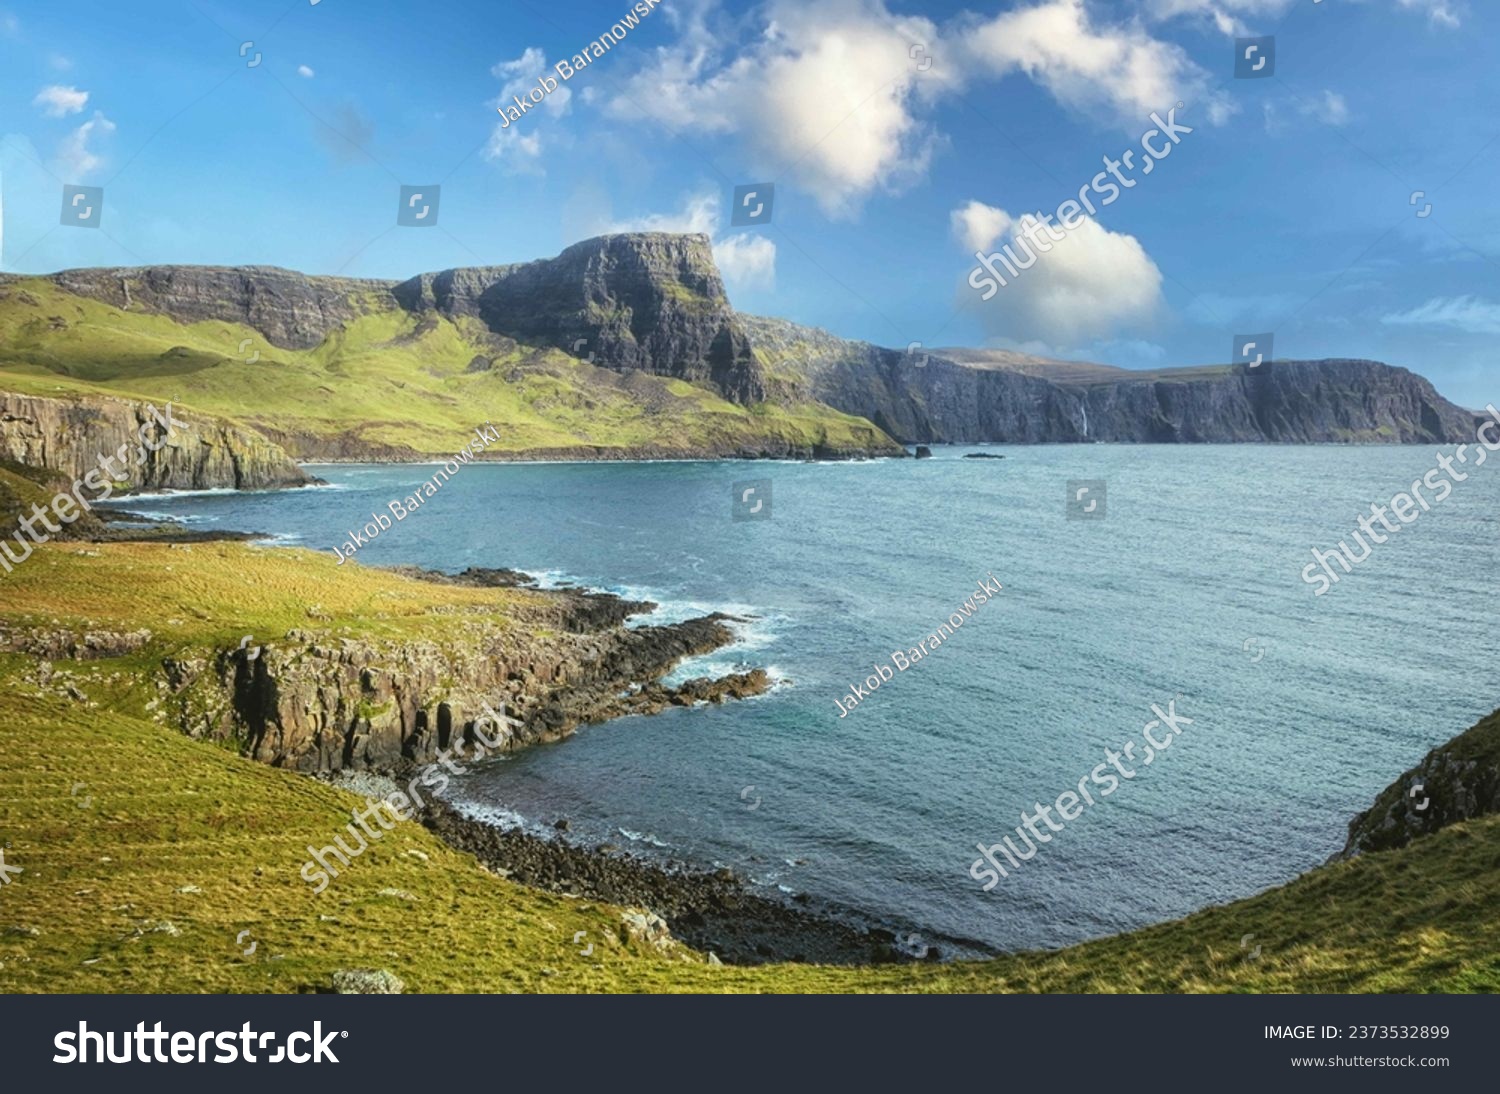 Isle of Skye is the largest island in the Inner Hebrides. It lies just off the west coast of mainland Scotland in the Atlantic Ocean.
Beautiful solitude in a quiet atmosphere without people. #2373532899